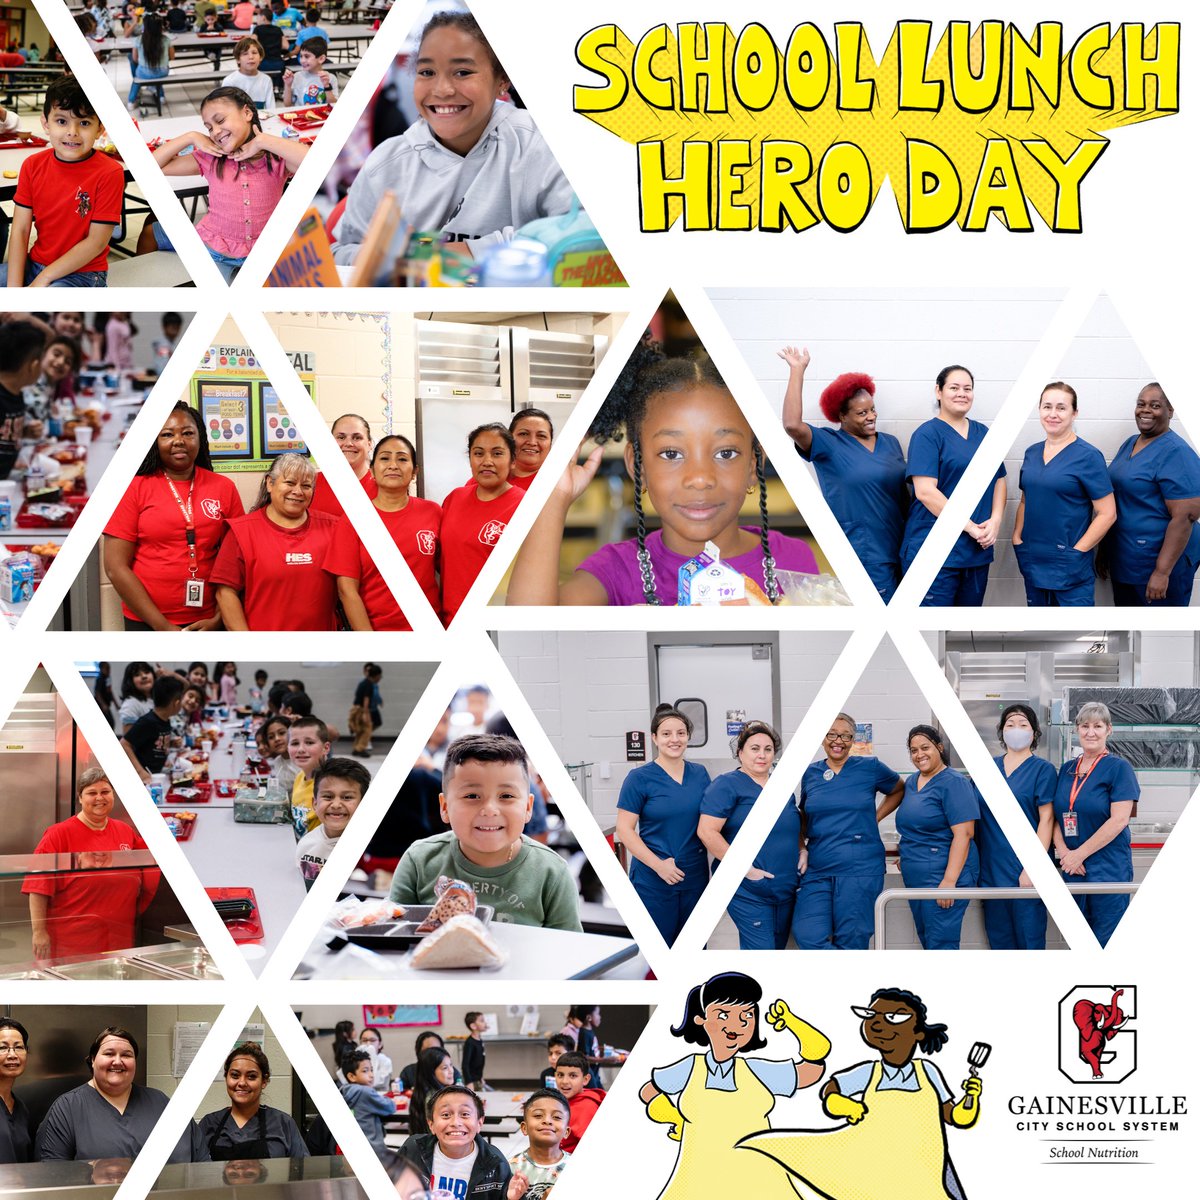 Today is School Lunch Hero Day! We appreciate everything our school lunch heroes do to help fuel our Big Red Family.